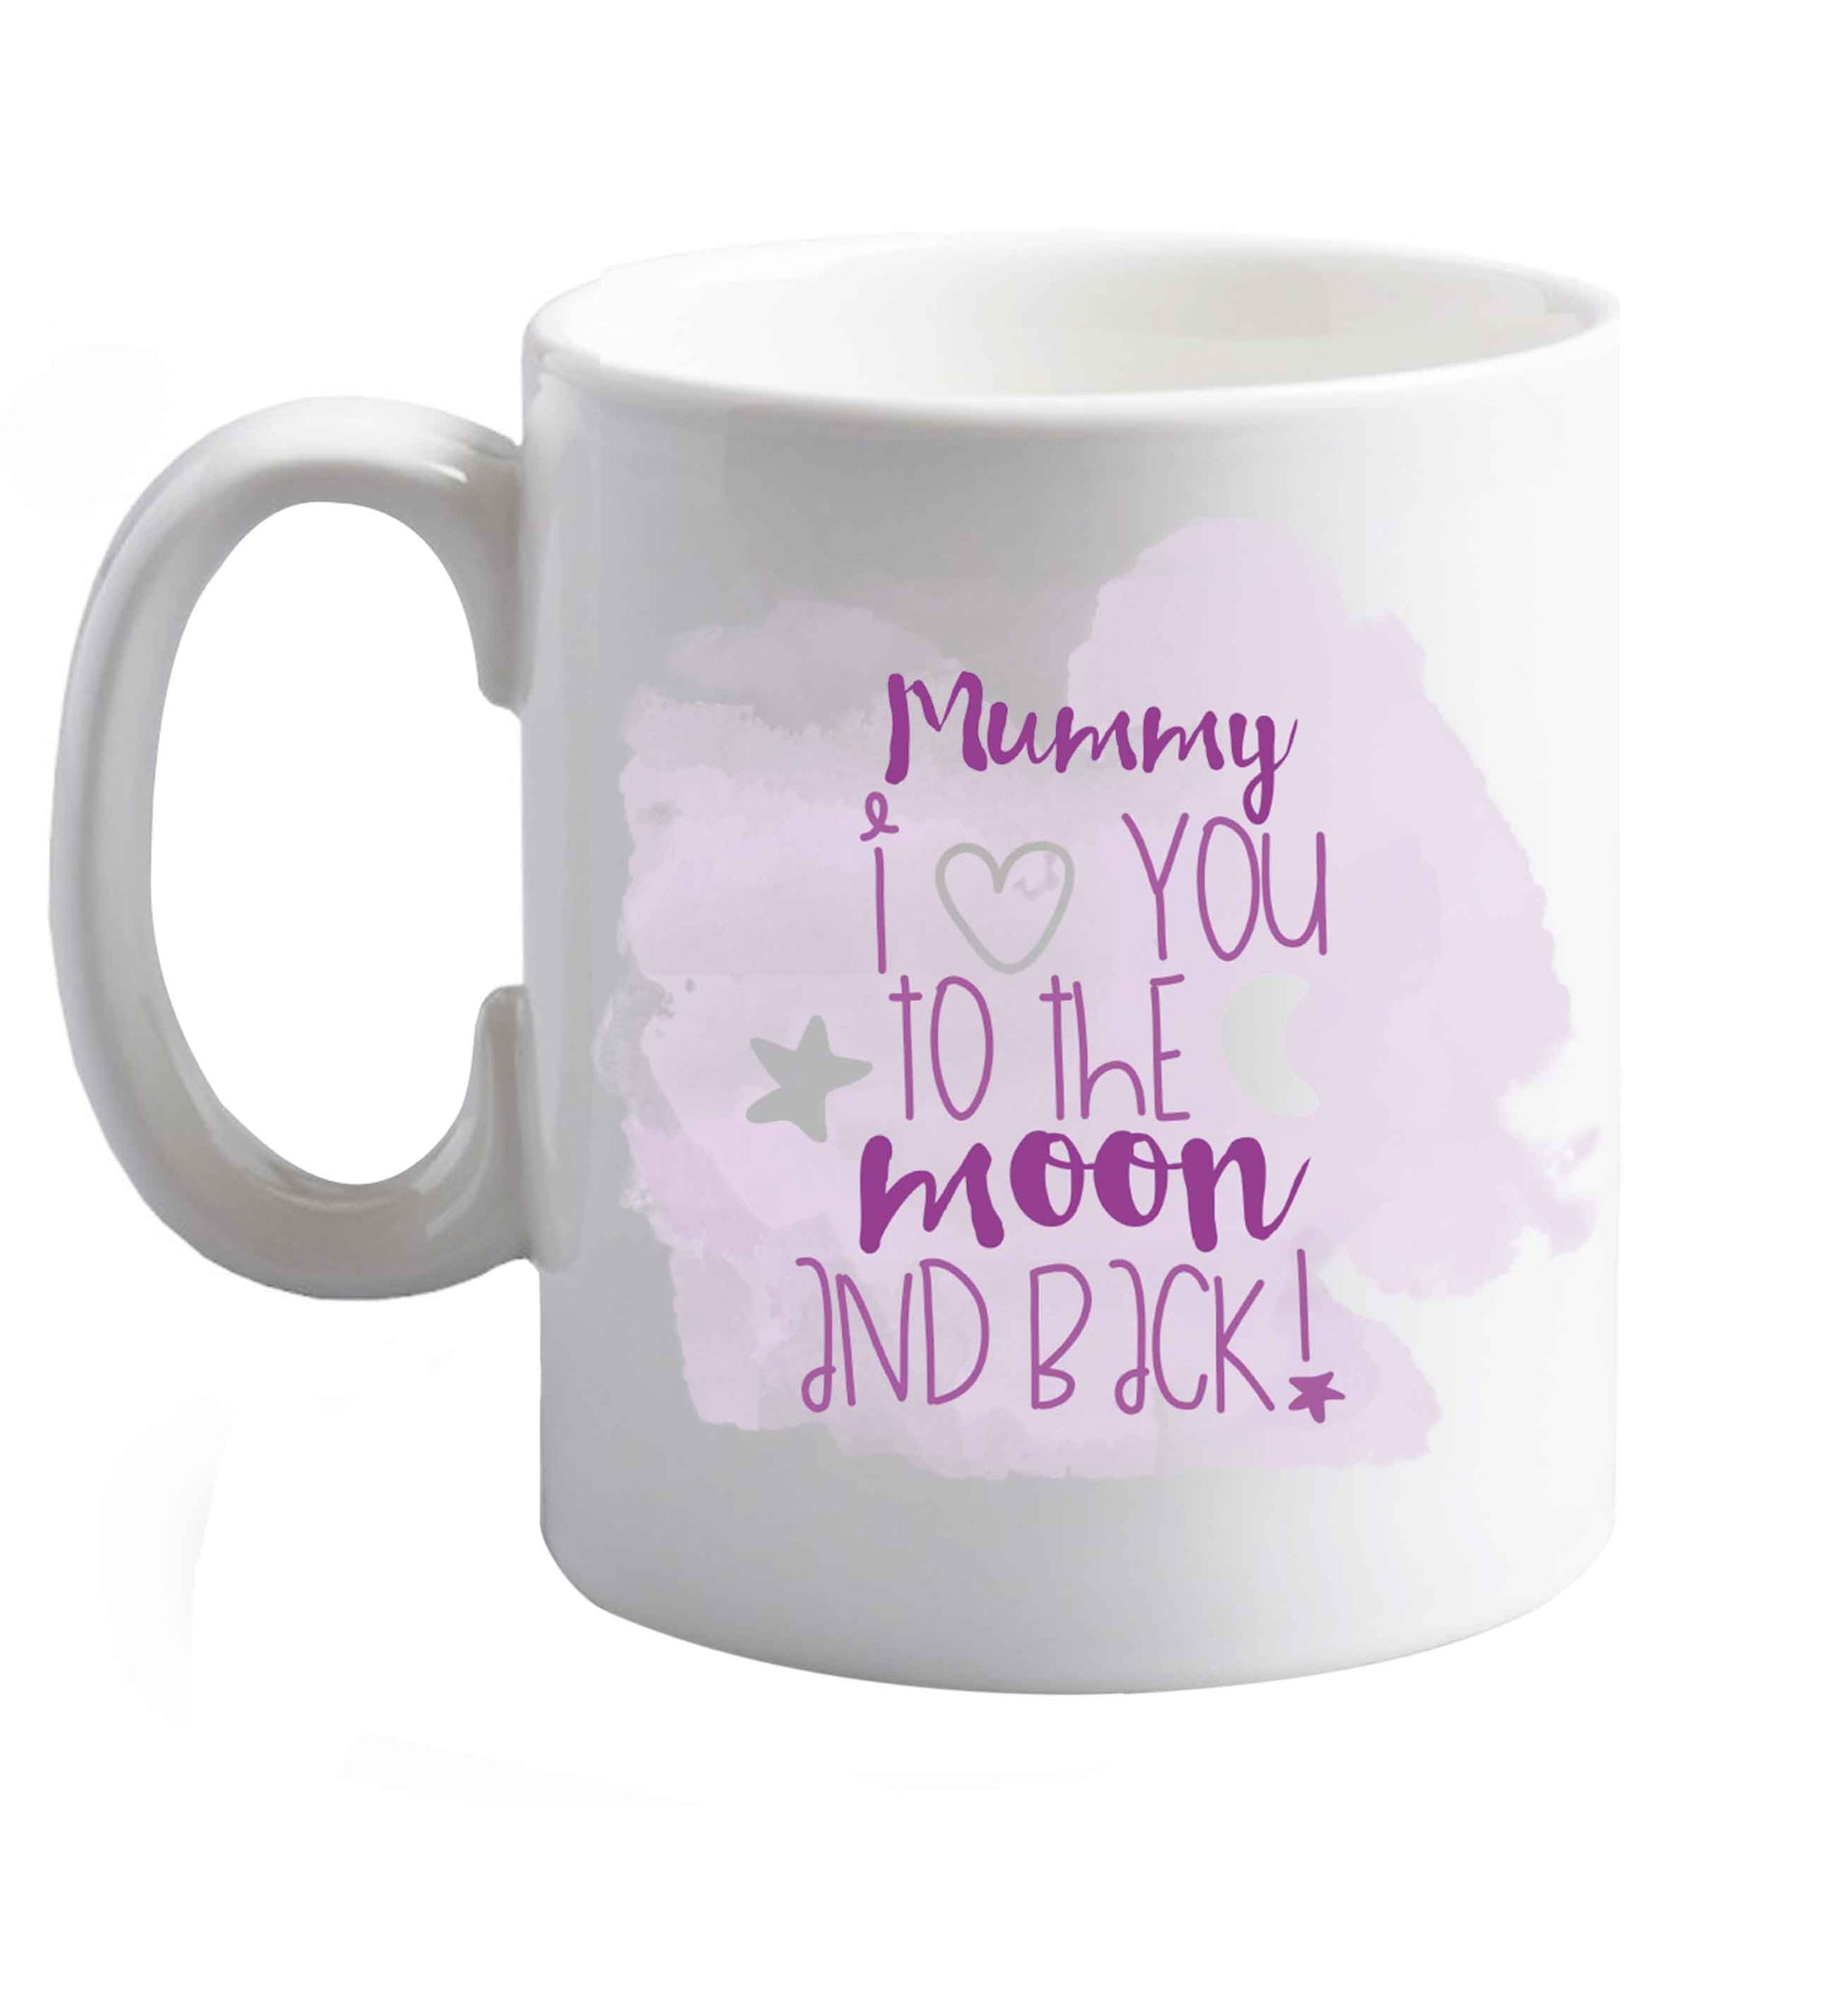 10 oz Mummy I love you to the moon and back ceramic mug right handed